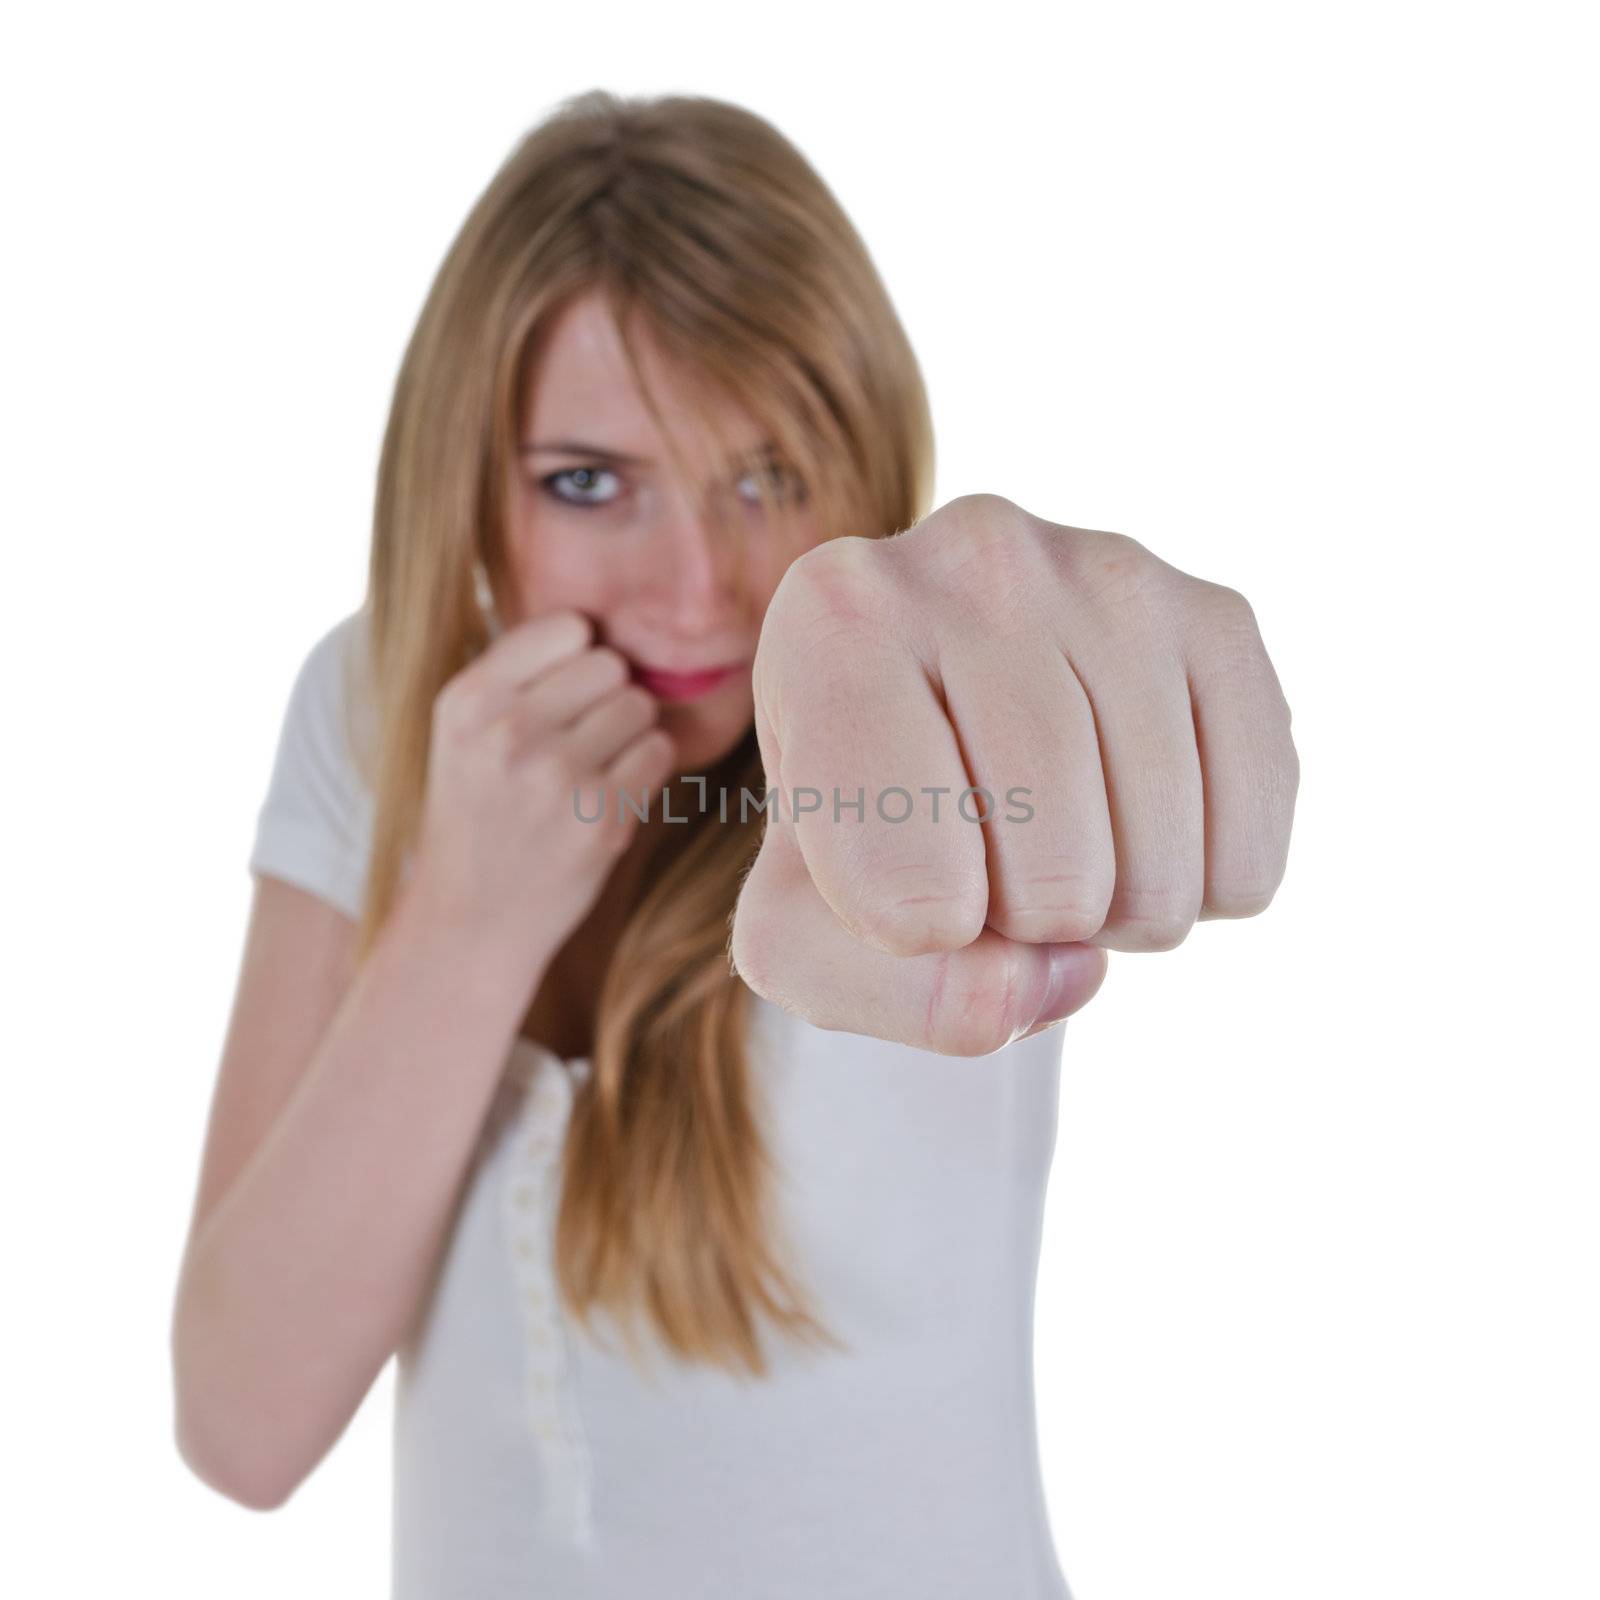 woman kickboxer kick out with left hand, isolated over white, focus on fist